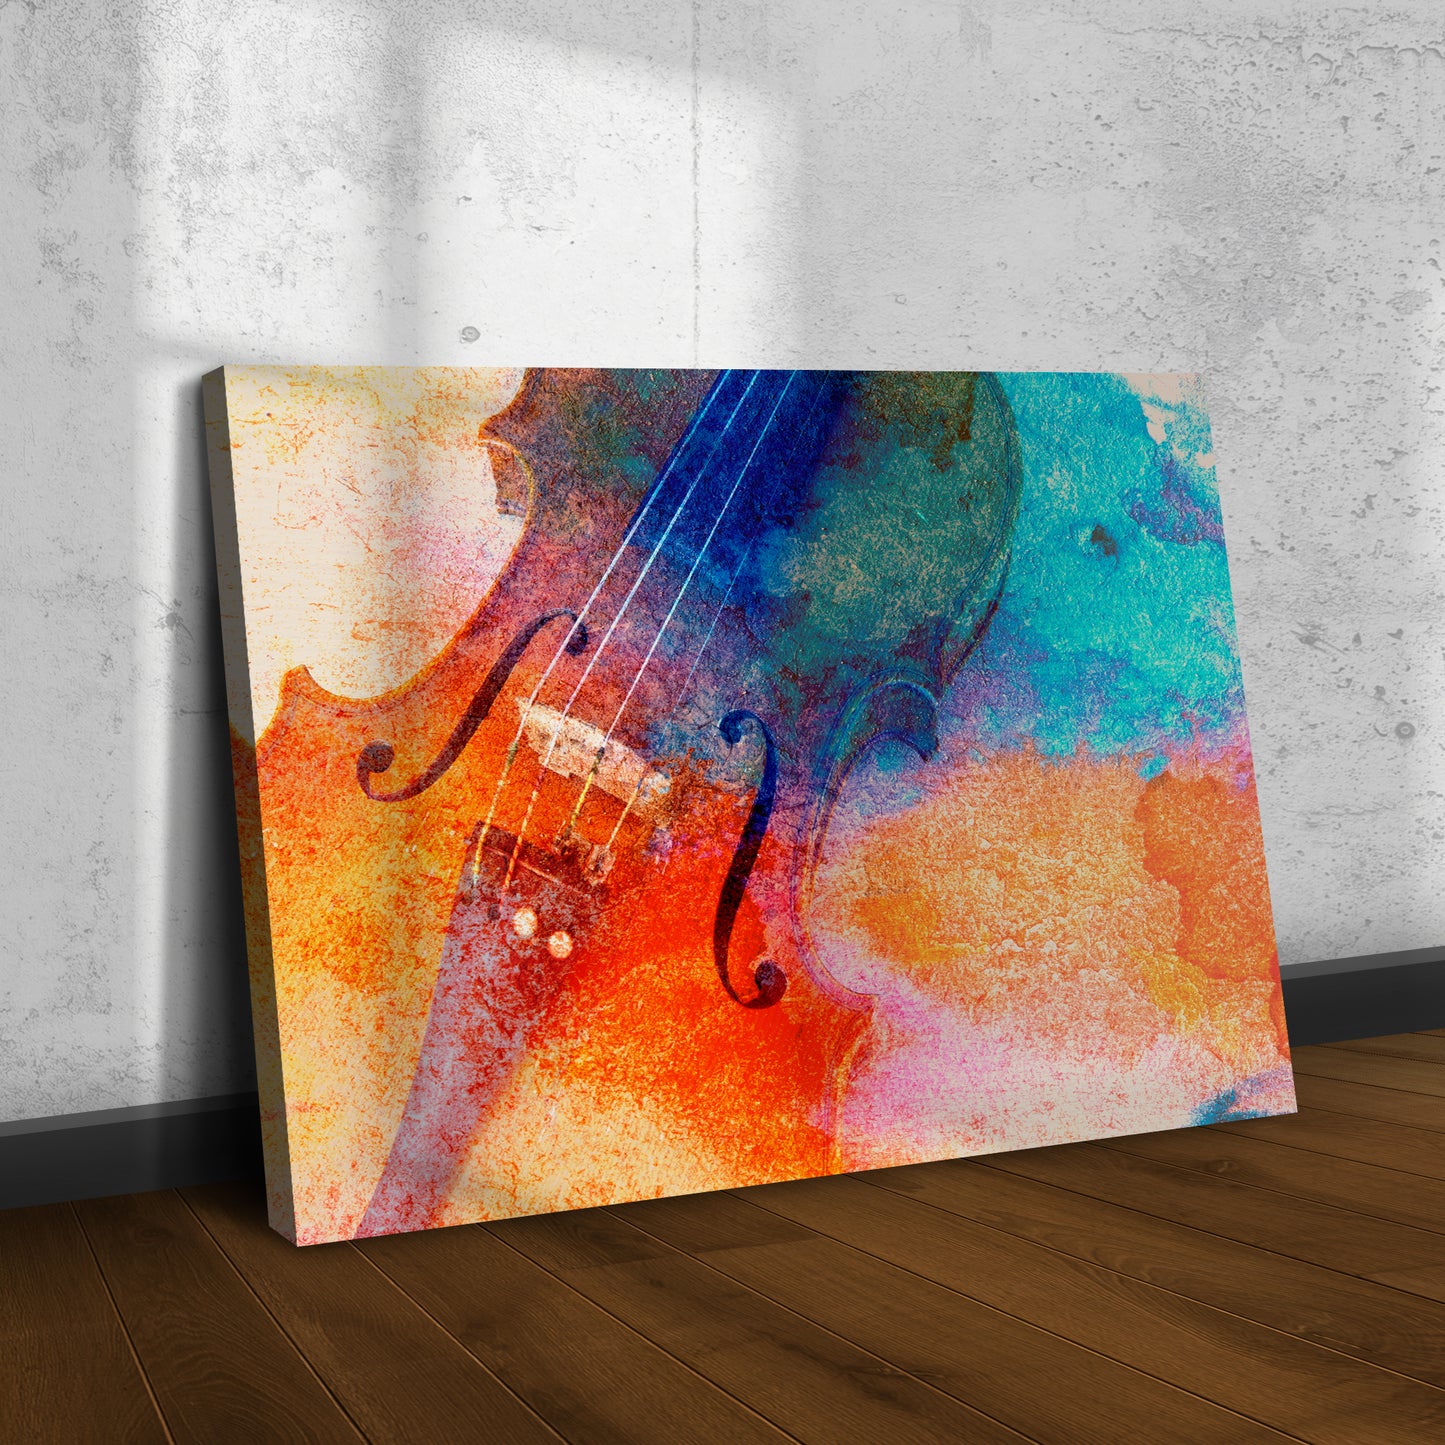 Cello Retro Canvas Wall Art - Image by Tailored Canvases